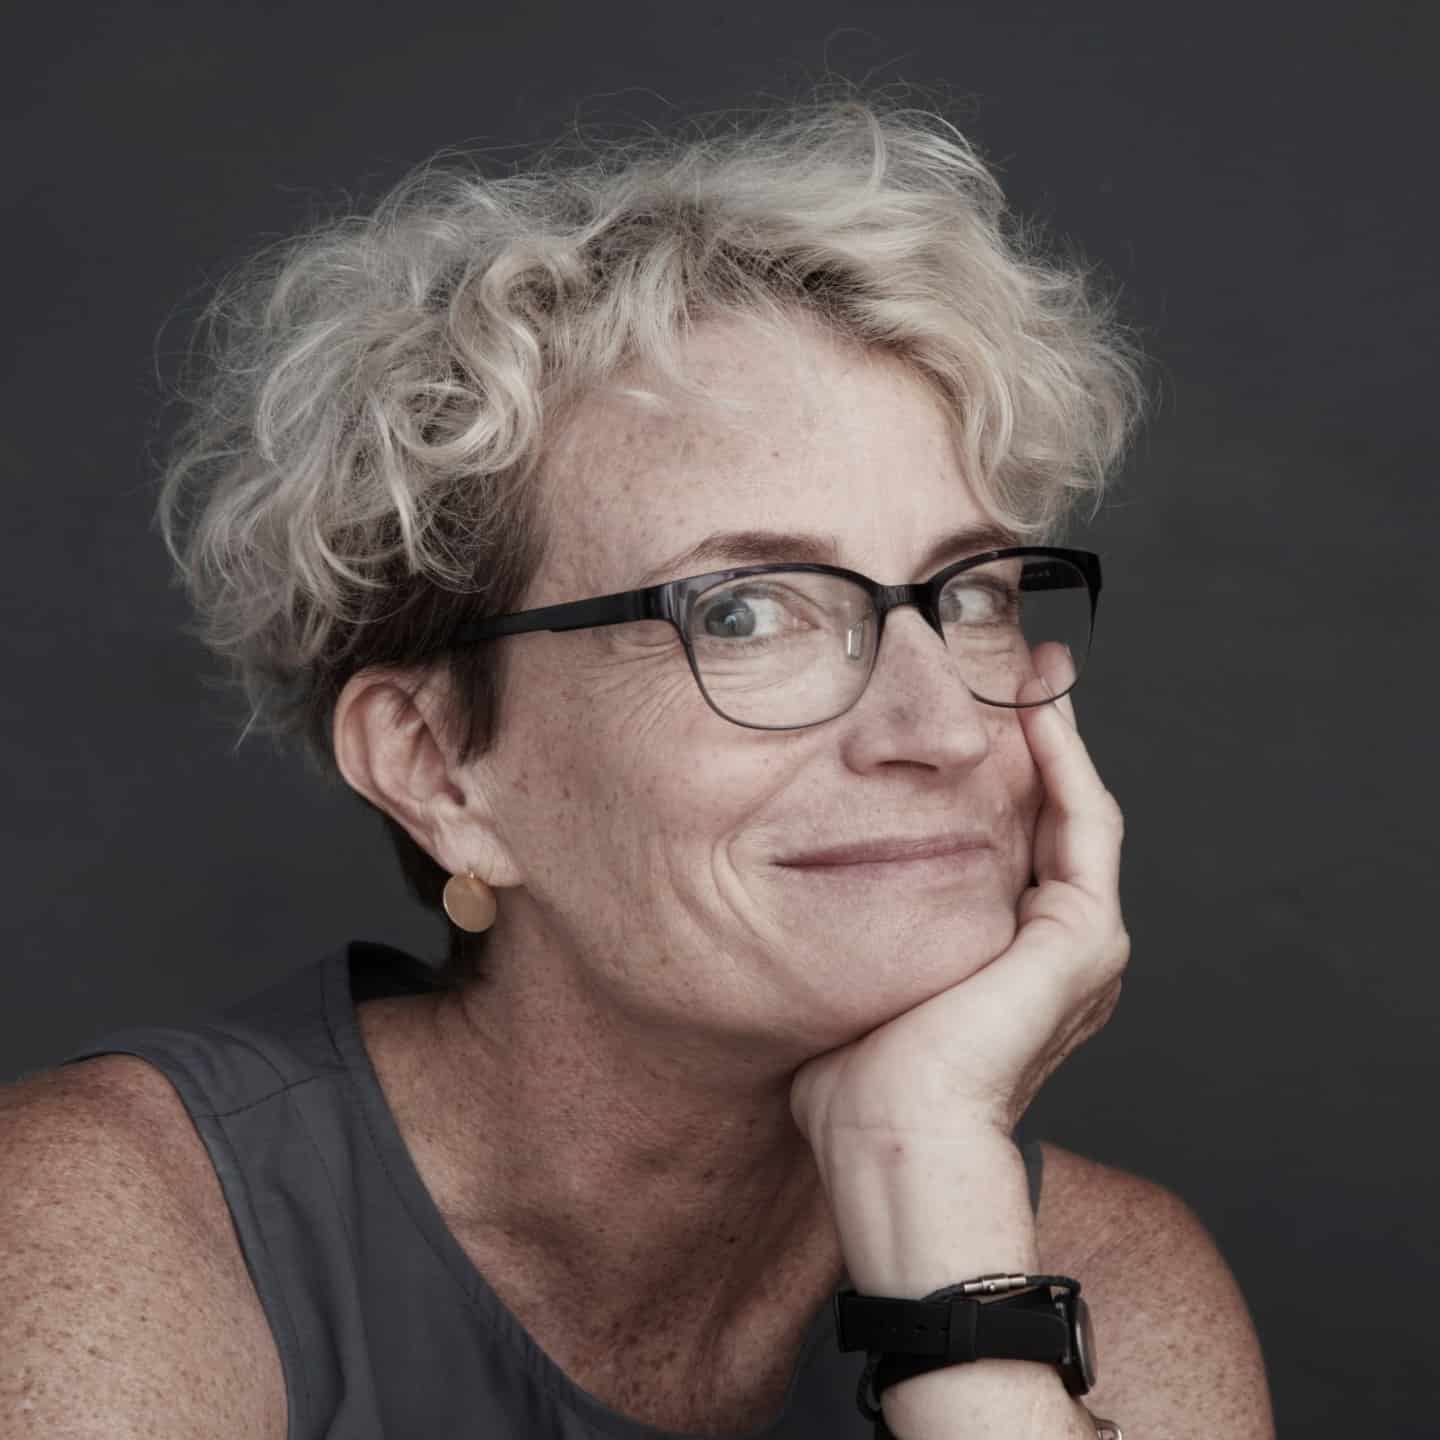 Author, journalist, and activist Ashton Applewhite will be the keynote speaker on March 29.